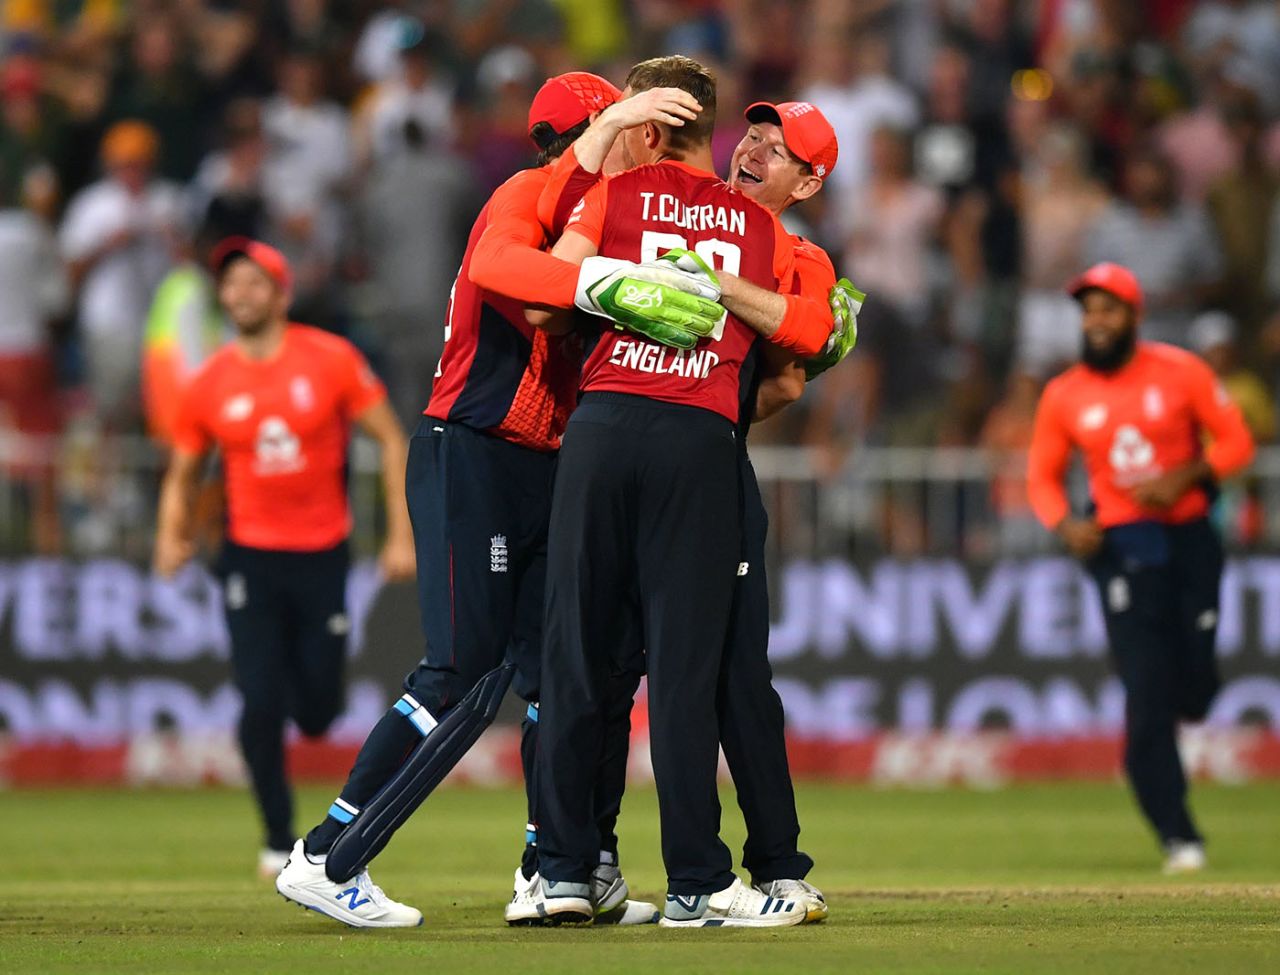 England celebrate their final-ball victory, South Africa v England, 2nd T20I, Durban, February 14, 2020